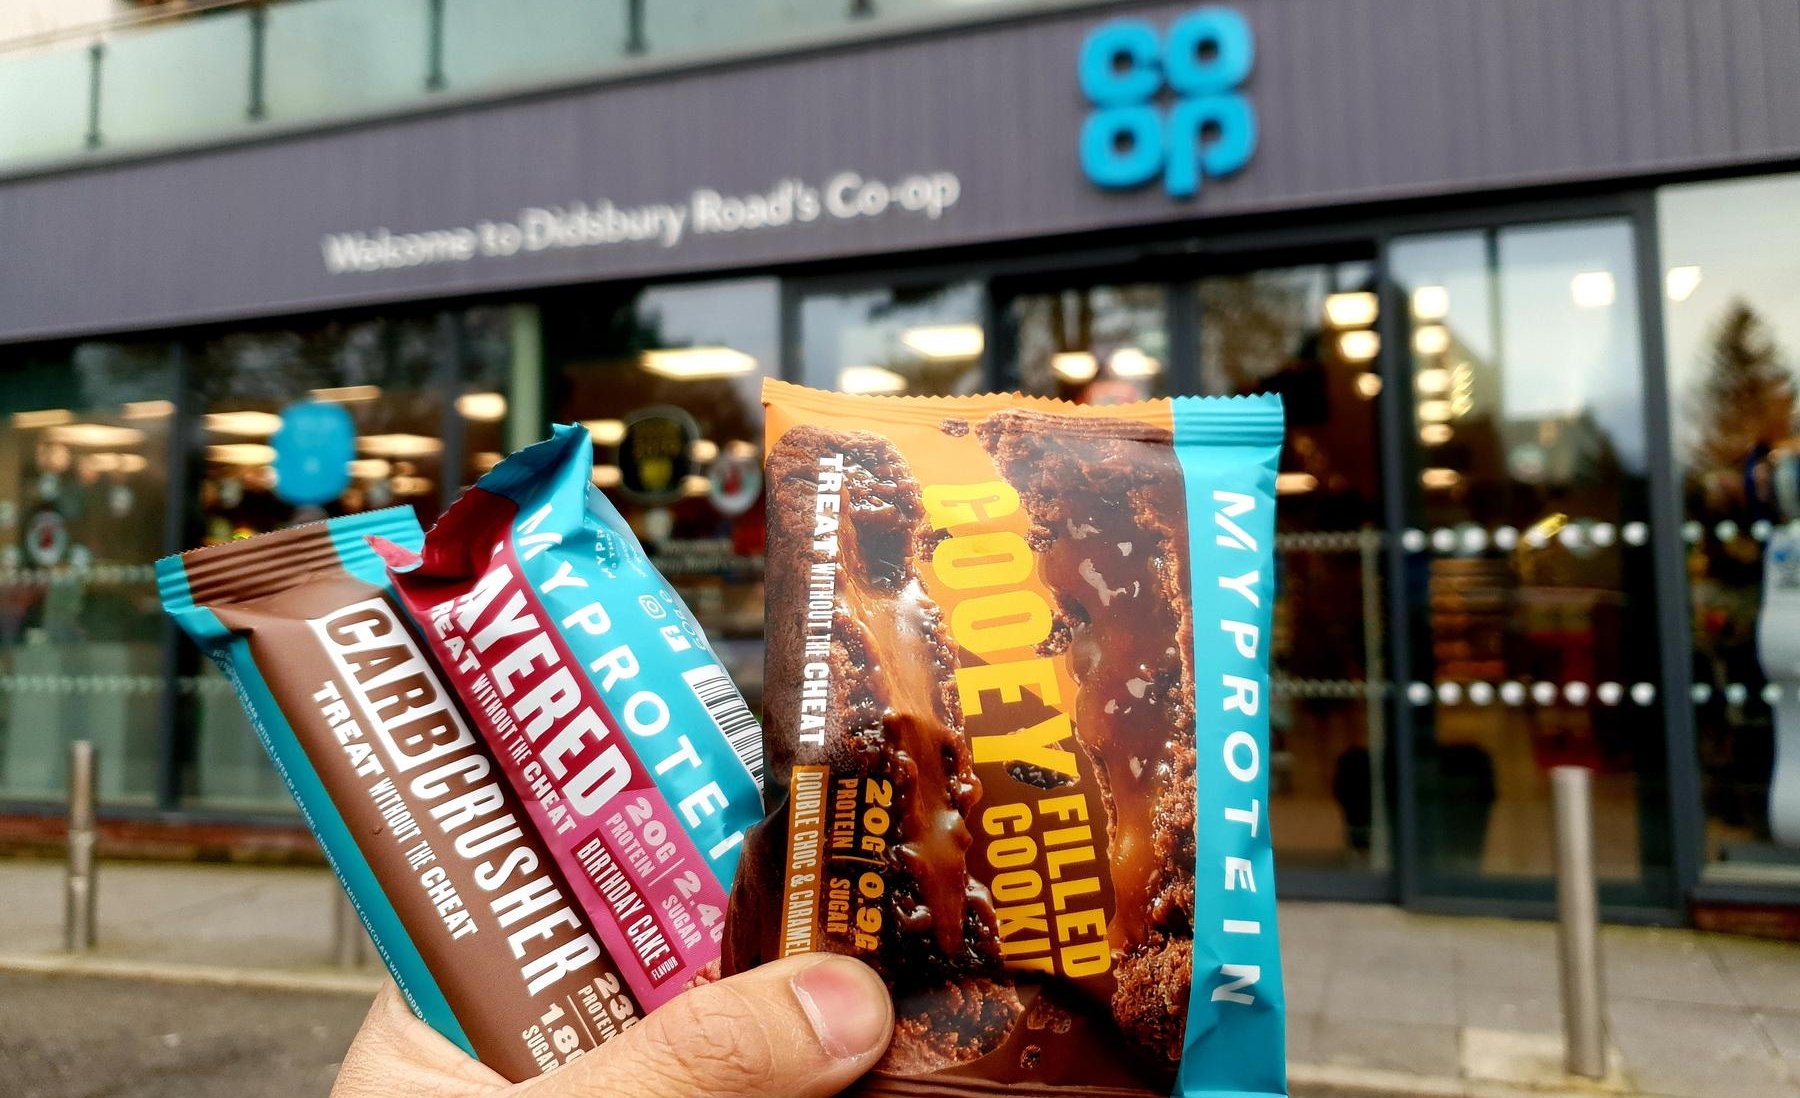 We’re Hitting Your High Street | Find Us In The Co-op